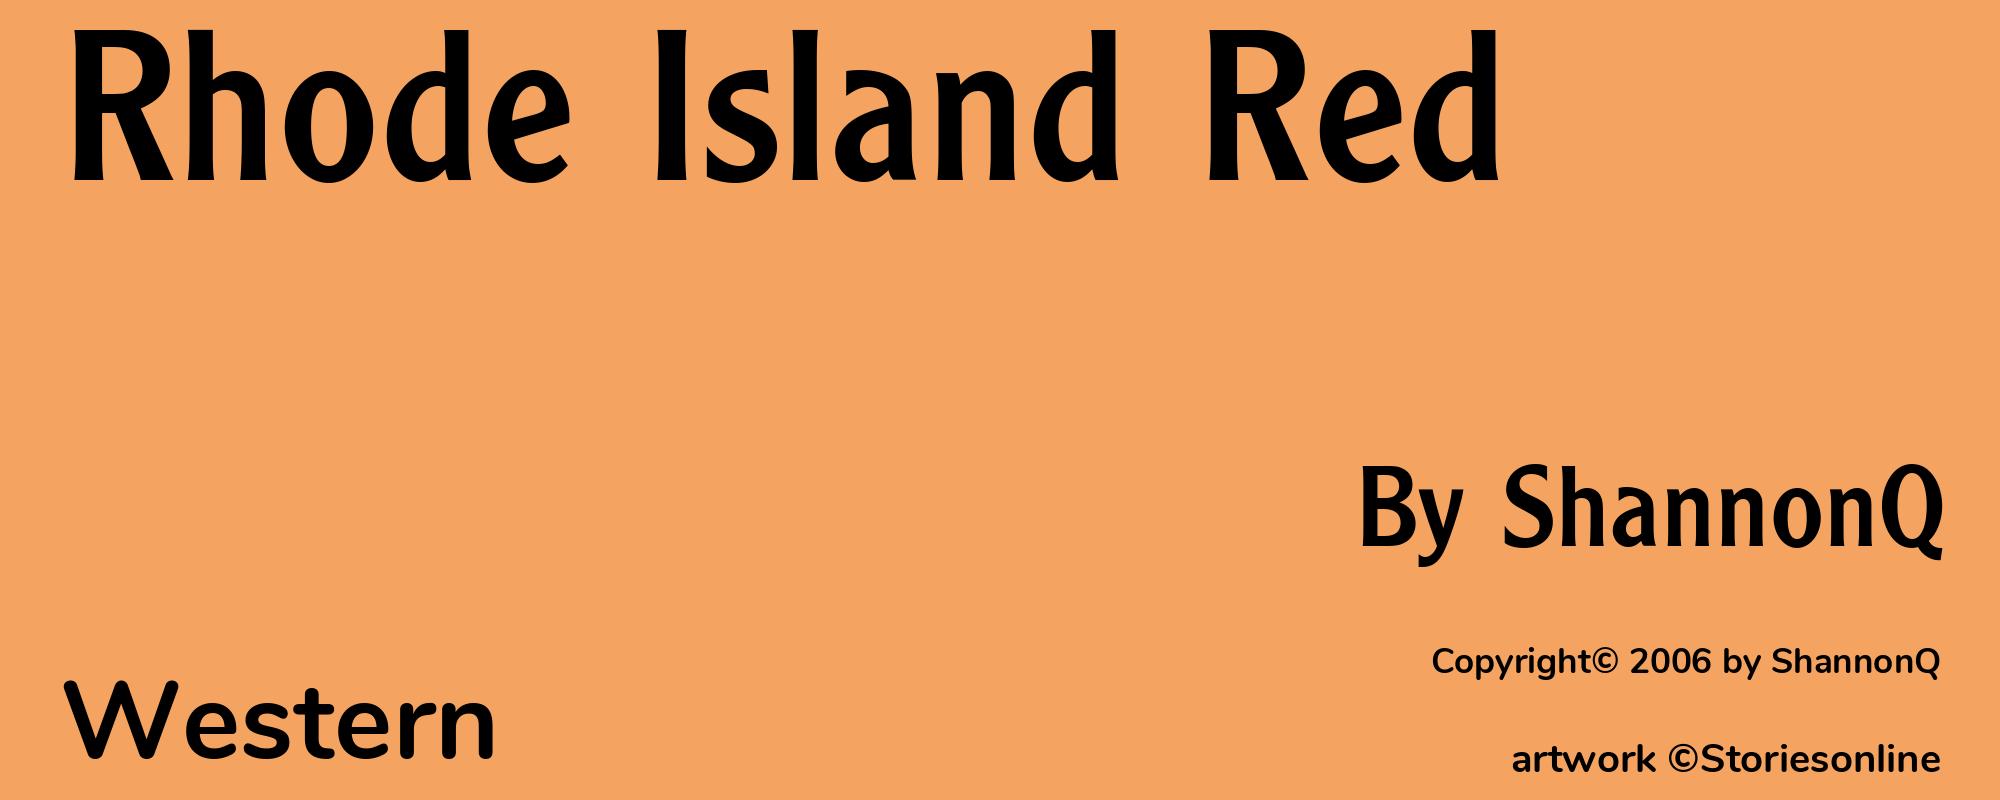 Rhode Island Red - Cover